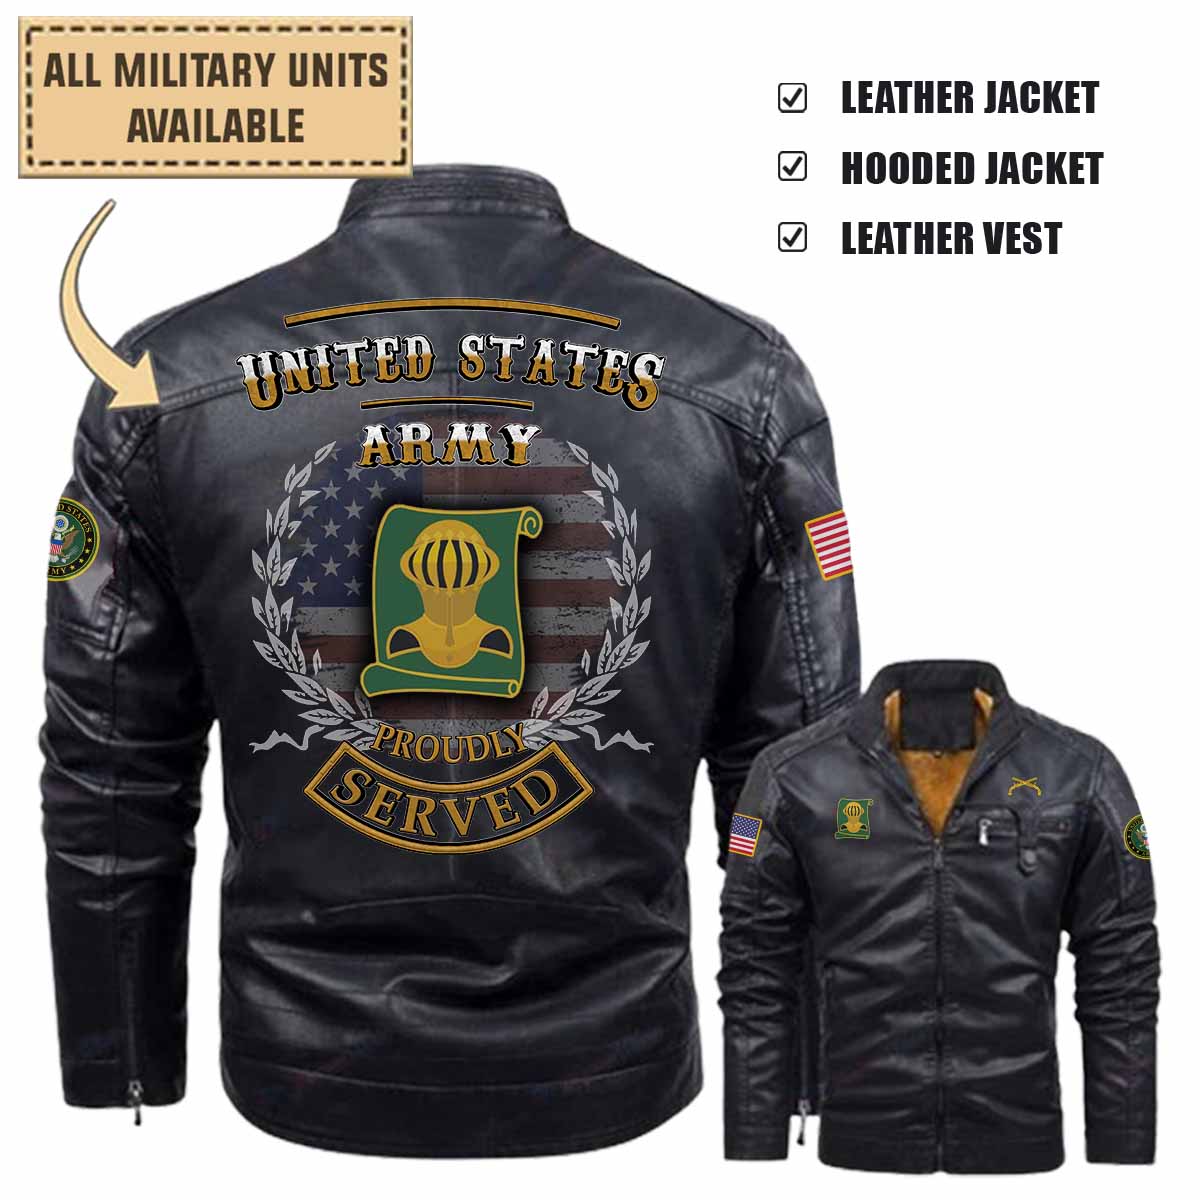 525th MP BN 525th Military Police Battalion_Leather Jacket and Vest